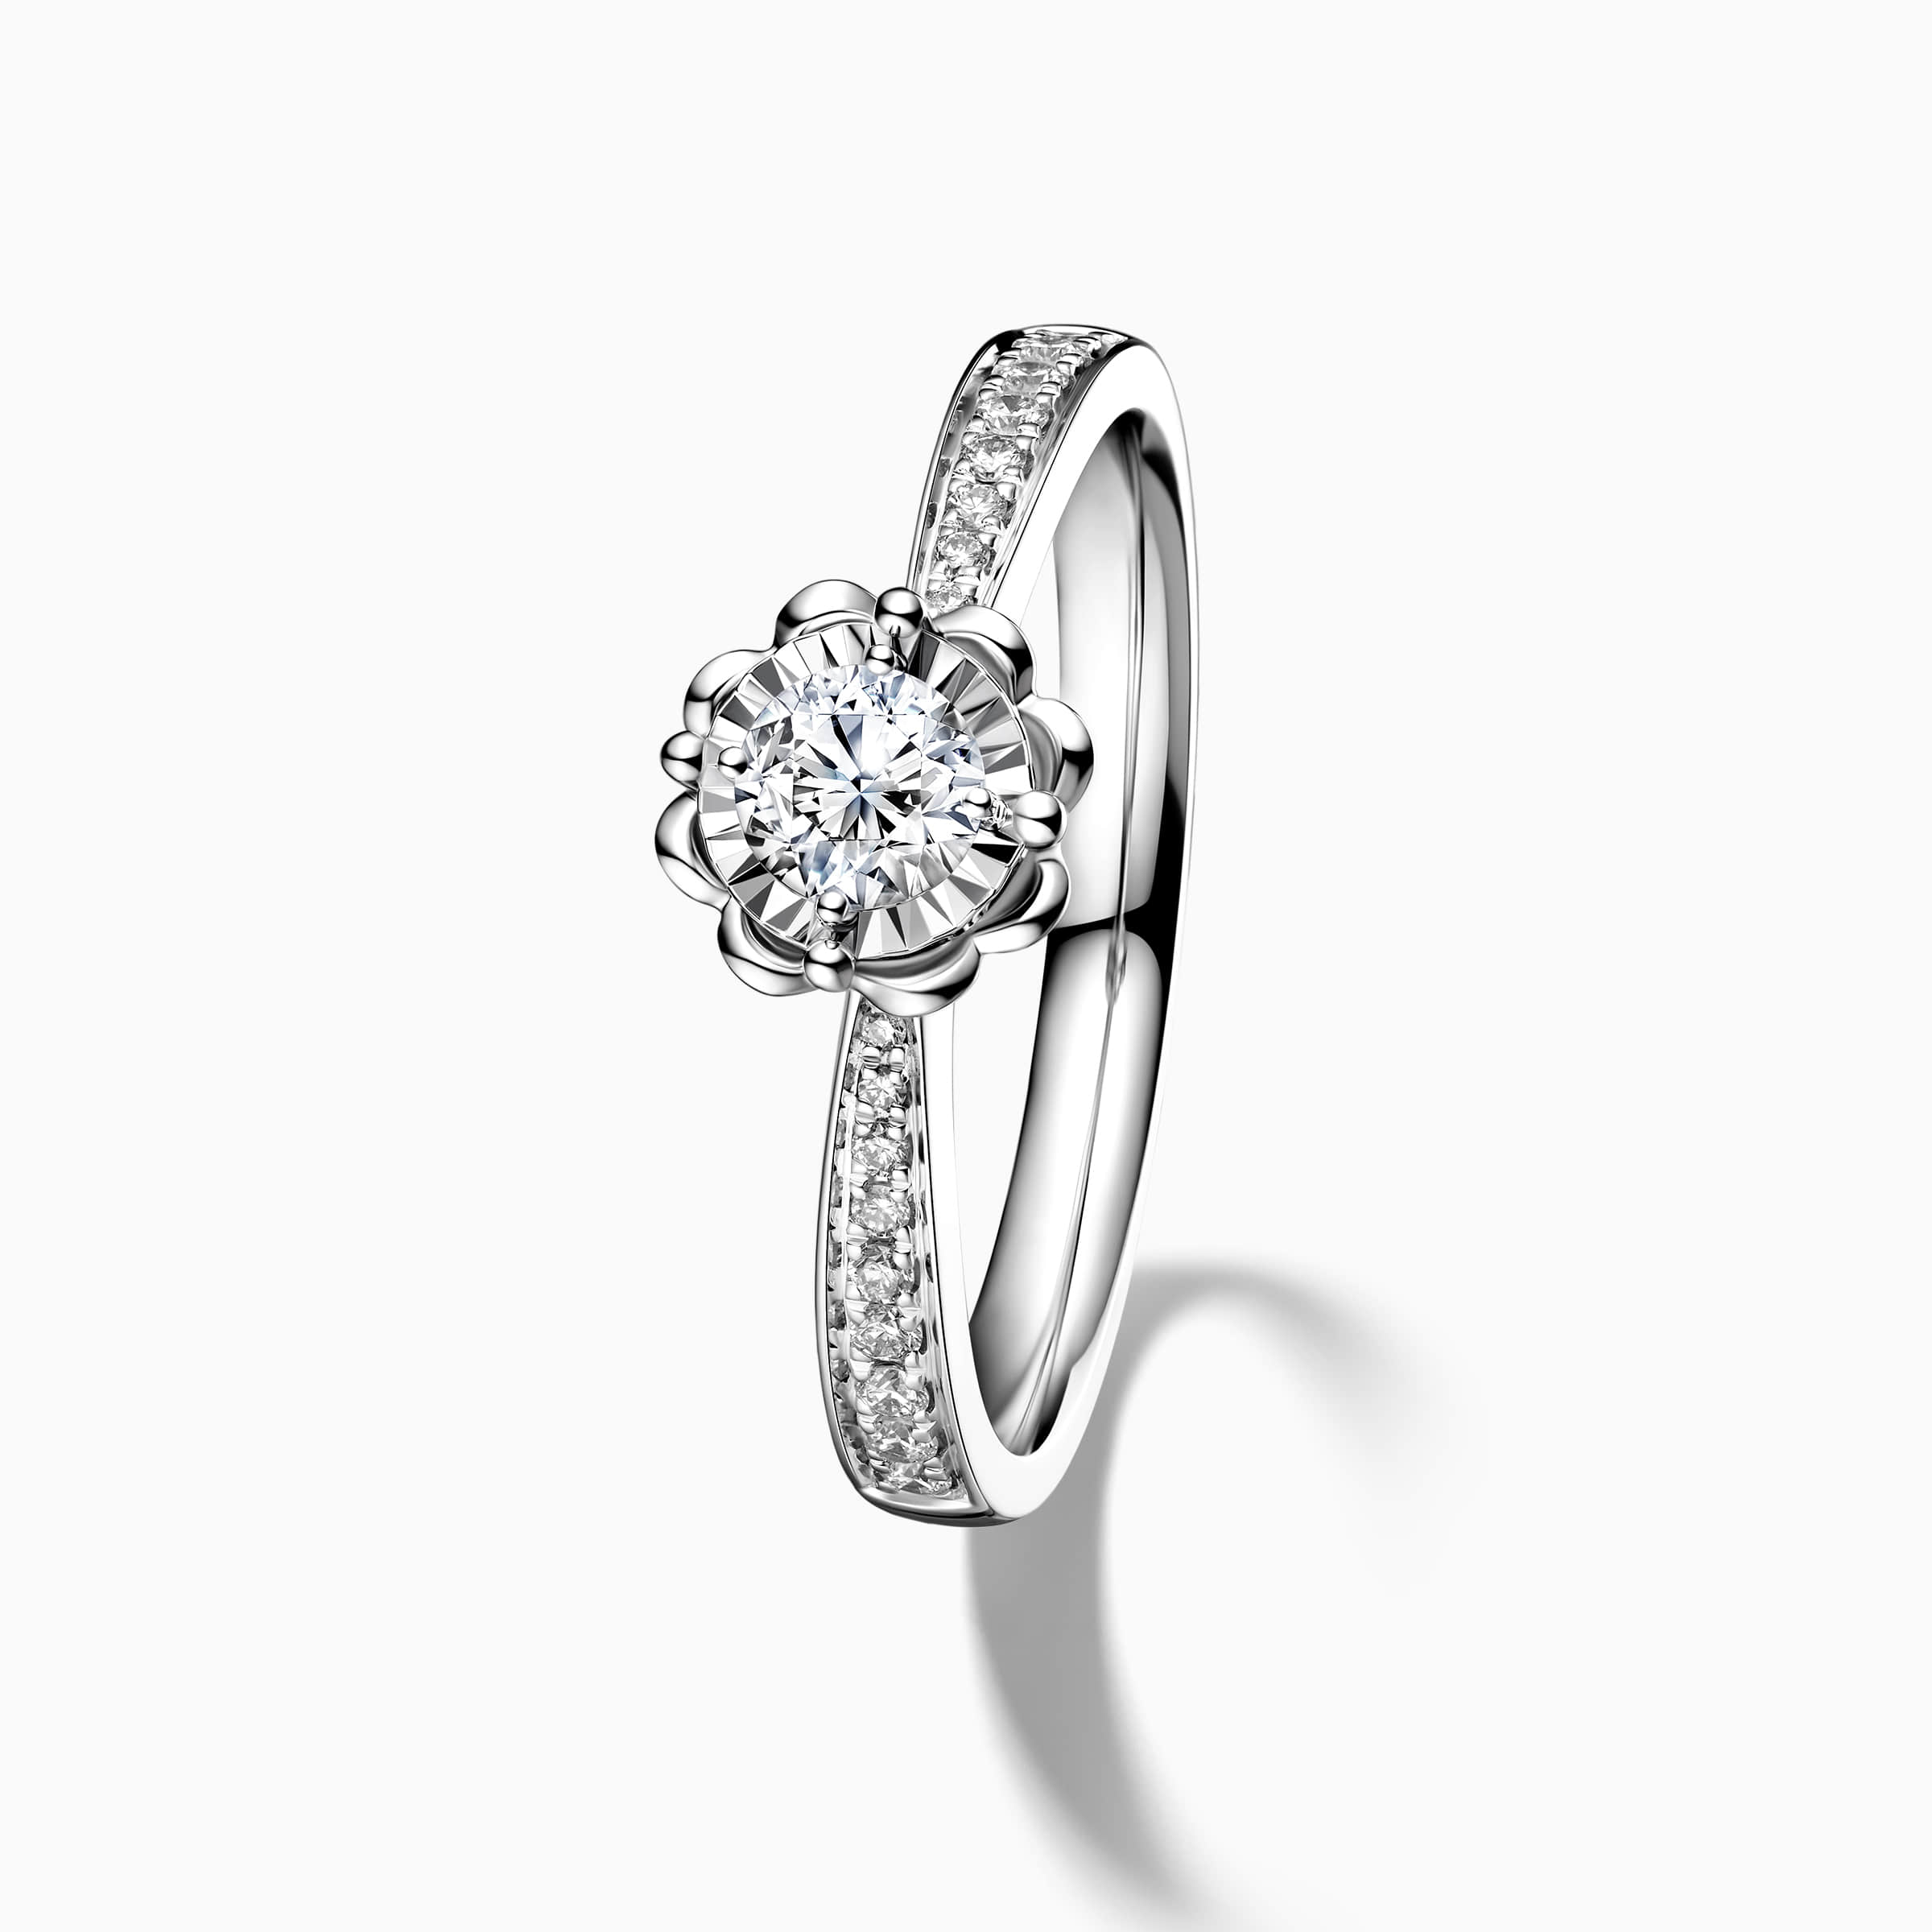 Darry Ring flower shaped engagement ring top view